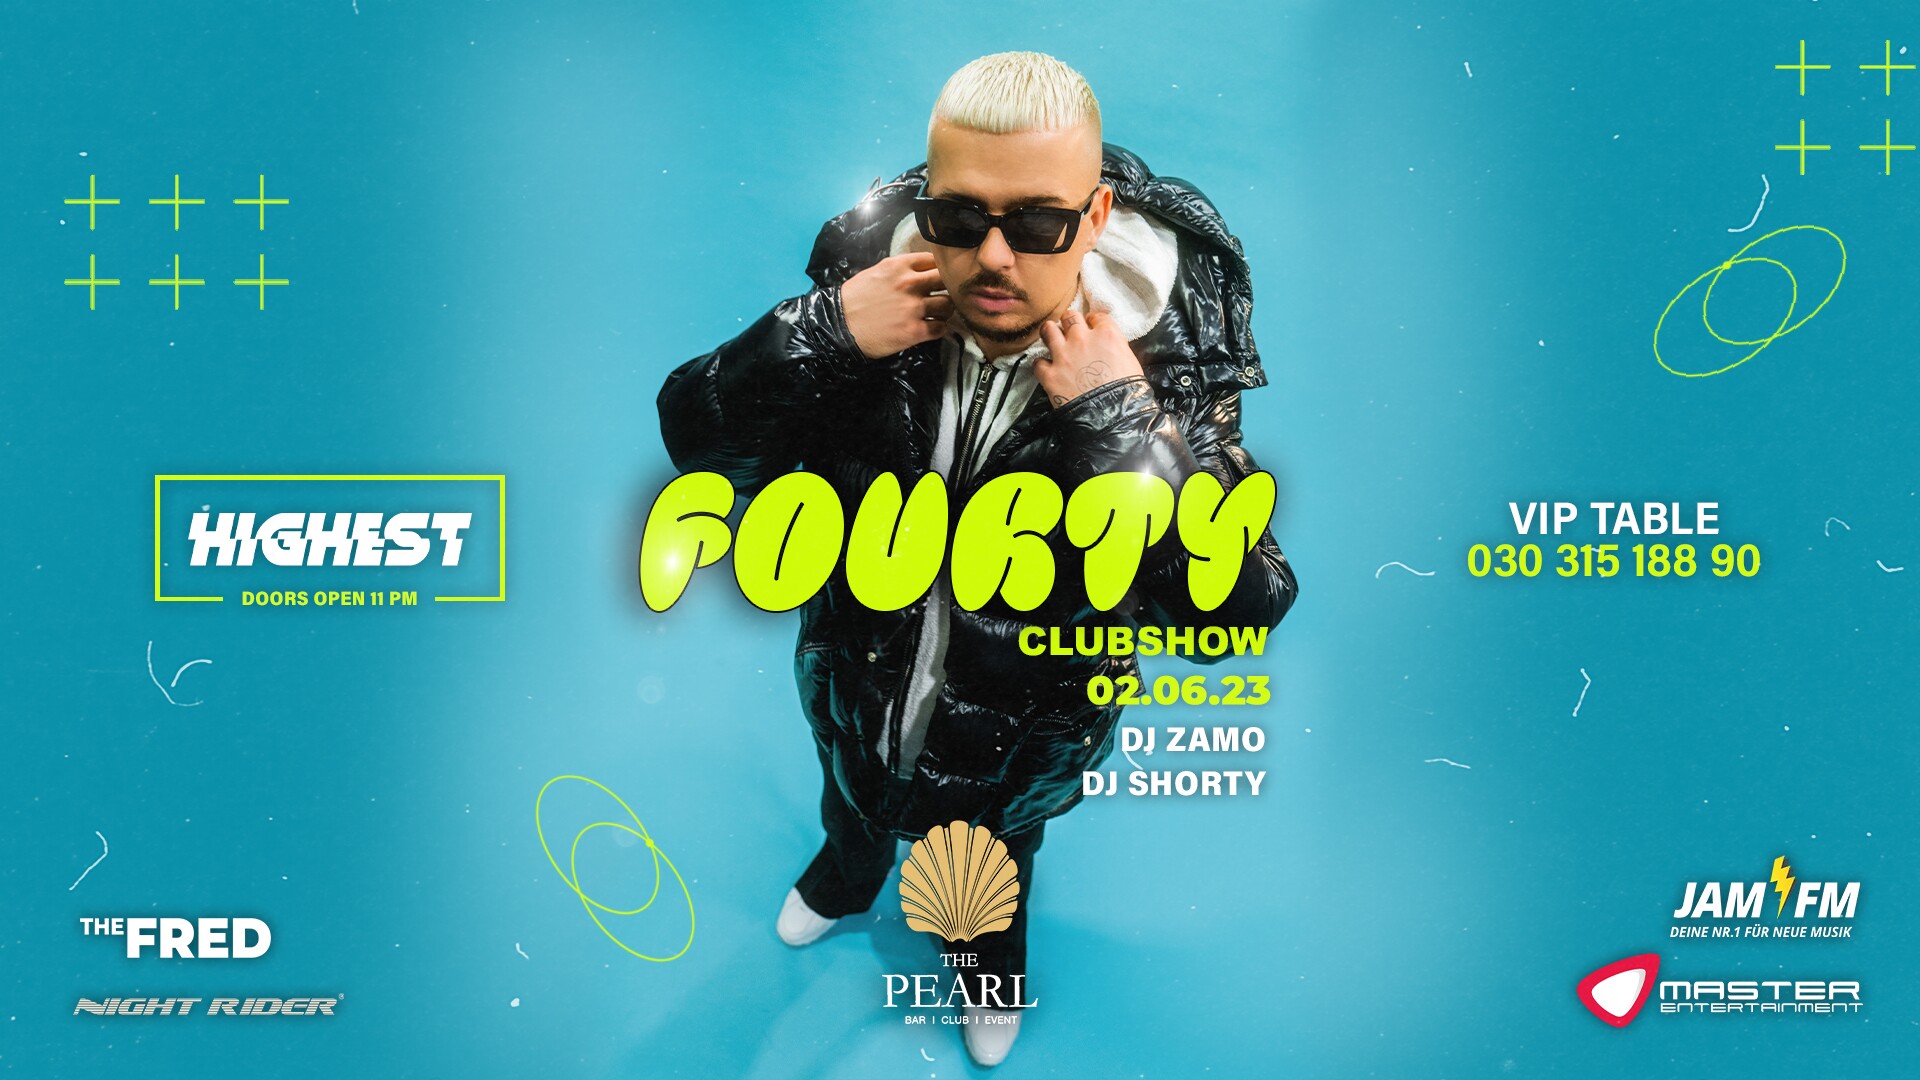 The Pearl 02.06.2023 Fourty - Clubshow Live by Highest